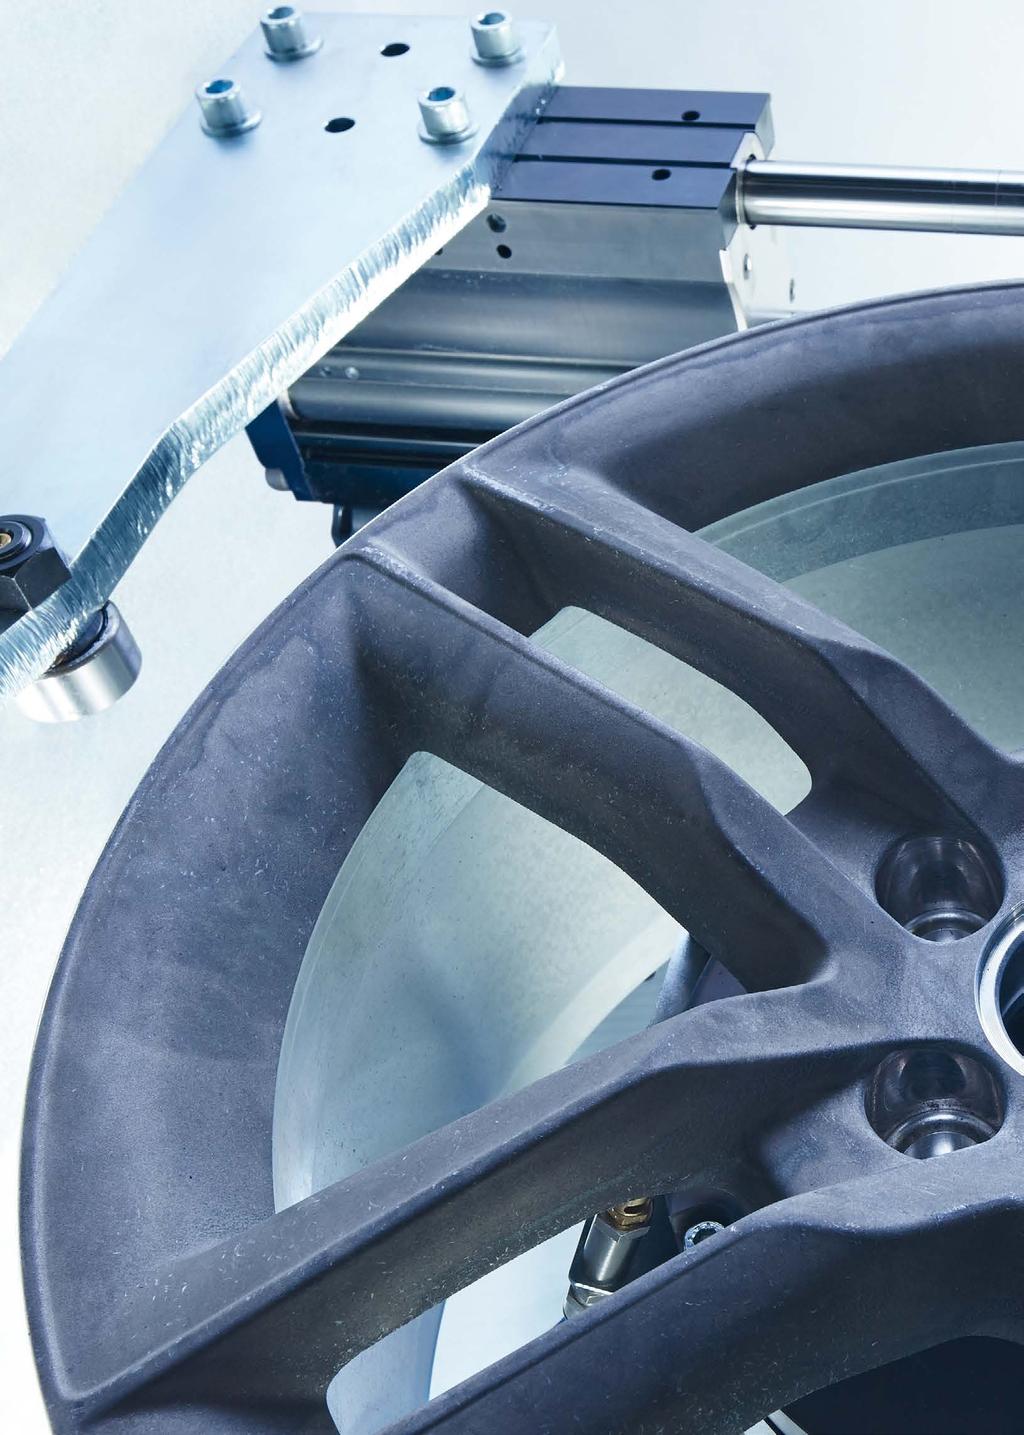 WHEEL MOUNTING SURFACE MAKRA offers a range of measuring instruments for testing the concavity of the wheel attachment face from a simple straightedge to convenient plane surface measuring devices